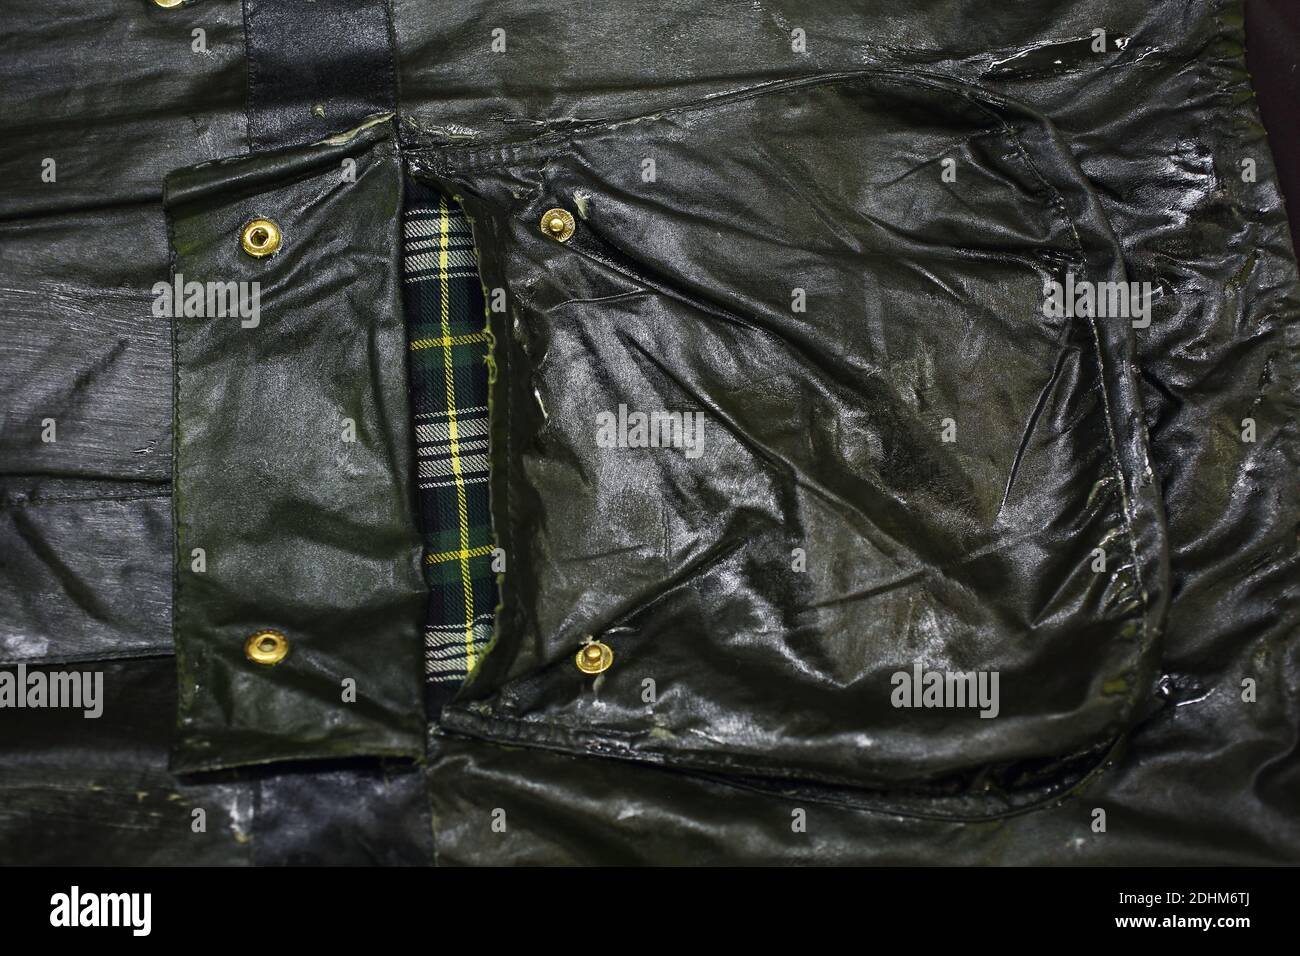 United Kingdom /South Shields/ Barbour/ Maker of jackets and other  lifestyle clothing. Rewaxing a Barbour jacket in factory Stock Photo - Alamy